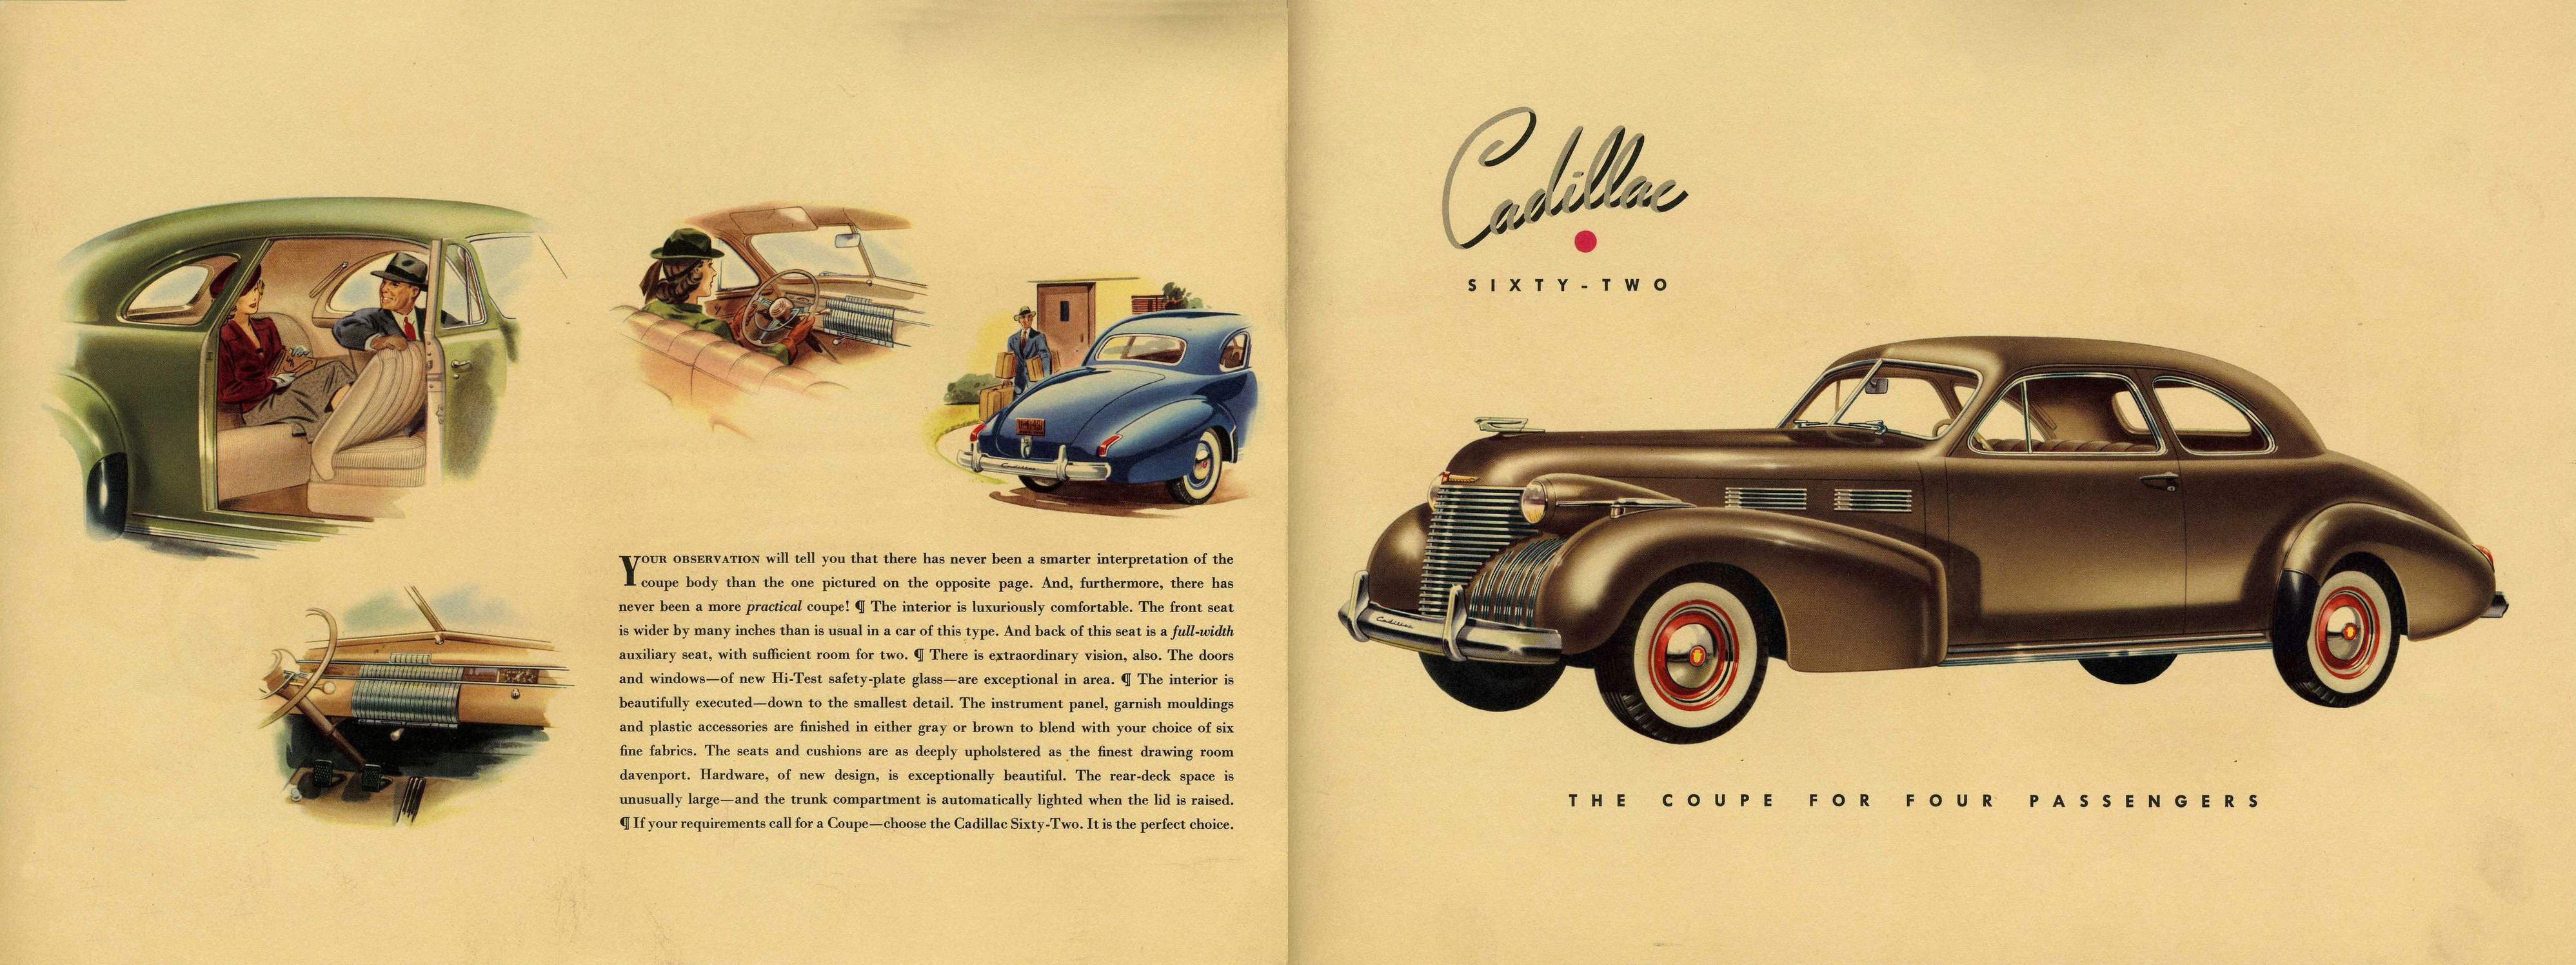 1940 Cadillac Mailer Page 3